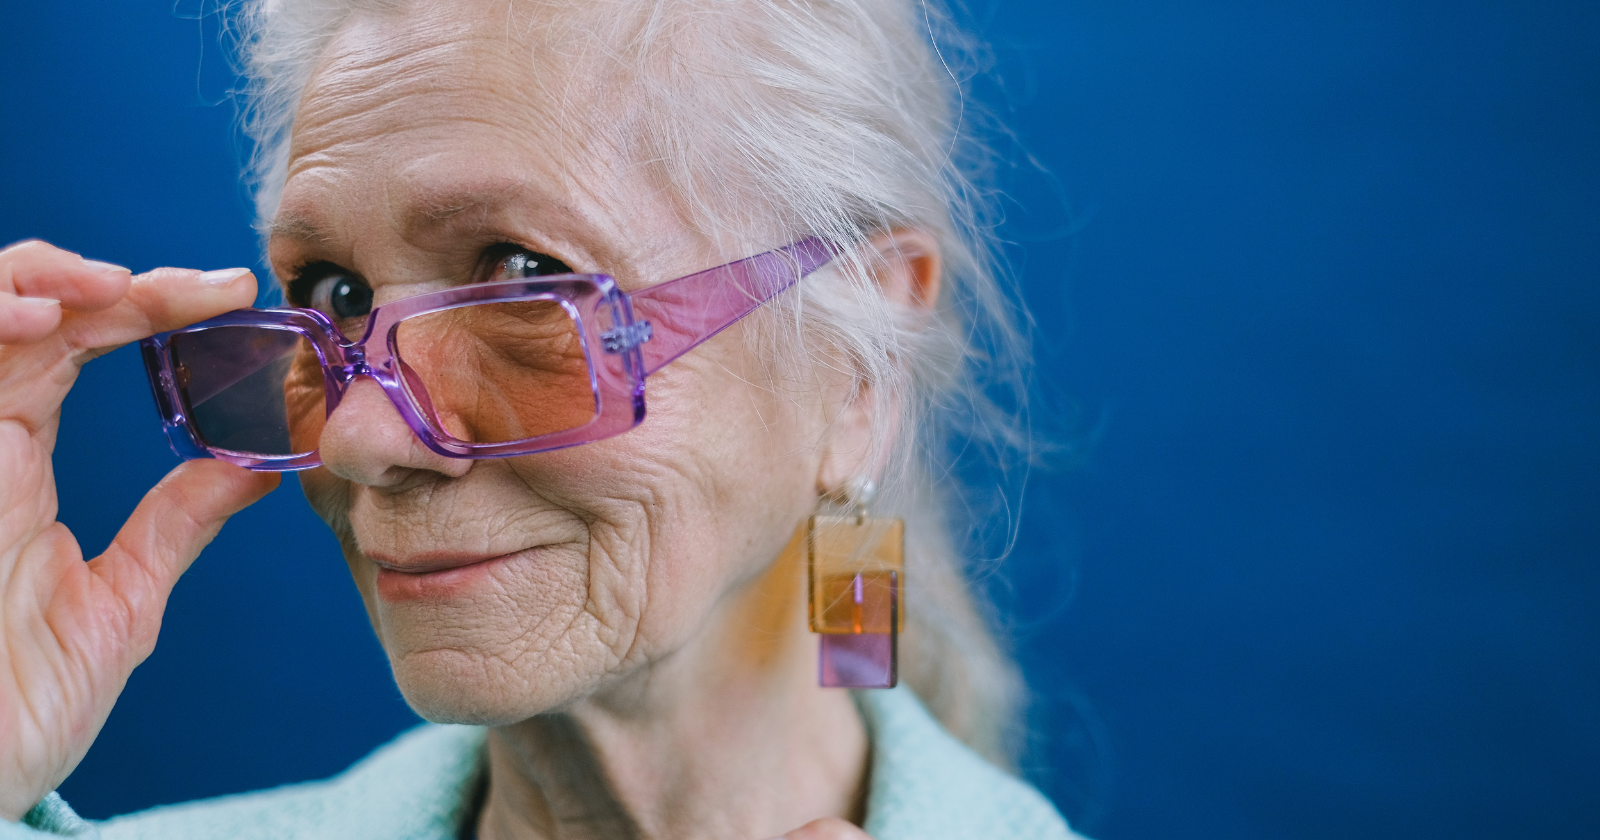 How To Help Elderly With Vision Problems